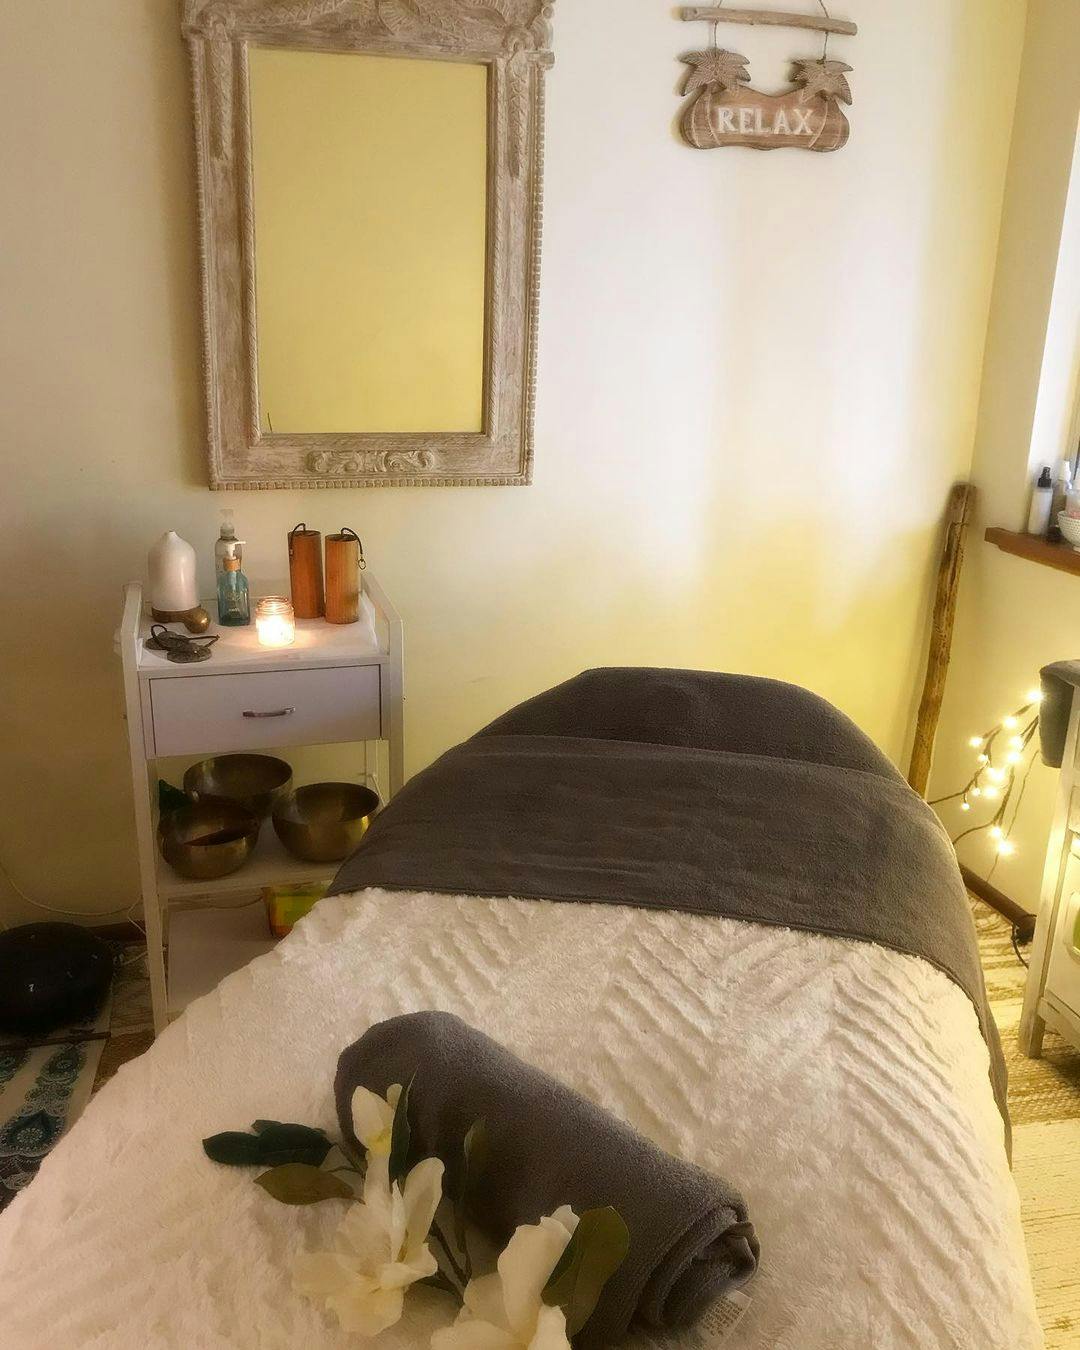 Welcome to my new beauty space home salon in narara open for wholistic beauty treatments and massage and sound healing.  #narara #centralcoast #centralcoastbeauty #centralcoastbeautytherapy #ilovecentralcoast #nararabeautysalon #centralcoastsoundhealing #mumsonthecentralcoast #centralcoastfacials #relaxonthecentralcoast #centralcoastmassage#centralcoastliving #centralcoastbusiness #nararavalley #relaxhere #niagarapark #lisarow #gosford #meditationcentralcoast#doterraoils #lovecentralcoastnsw #centralcoastsalon #waxingcentralcoast #centralcoastwomeninbusiness